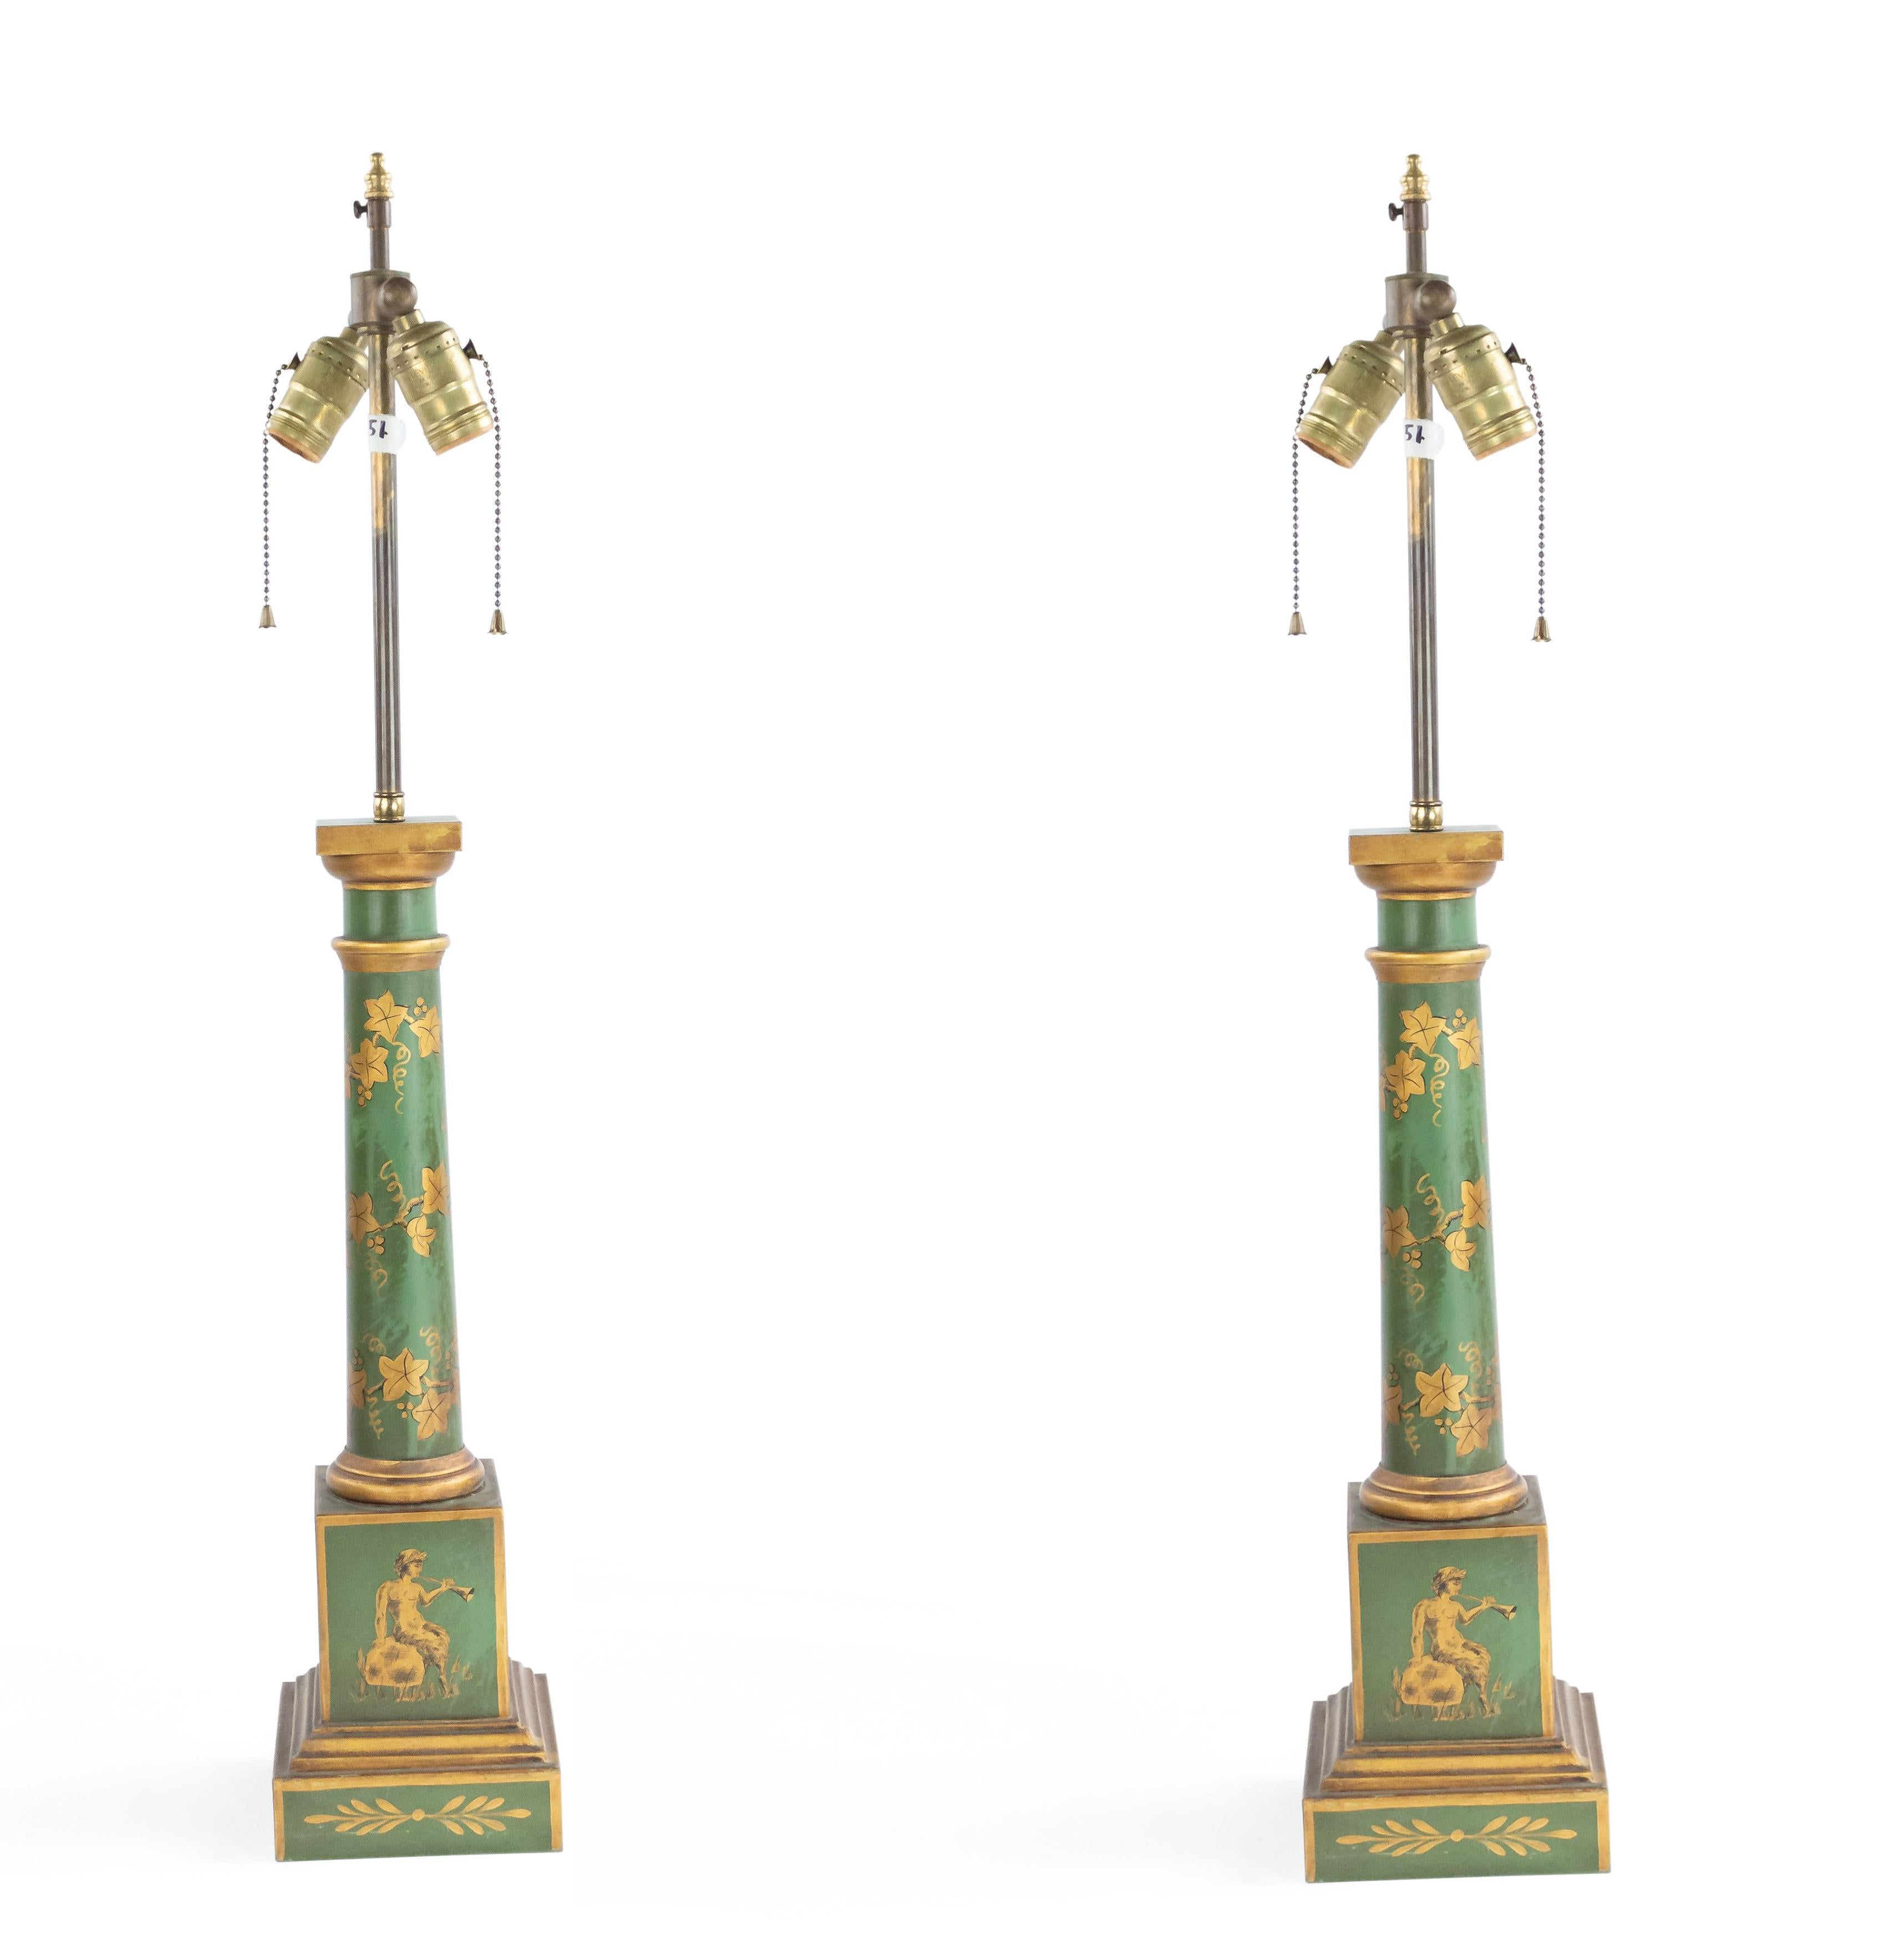 Pair of French Directoire style 20th century green and gold tole floral decorated column table lamps.